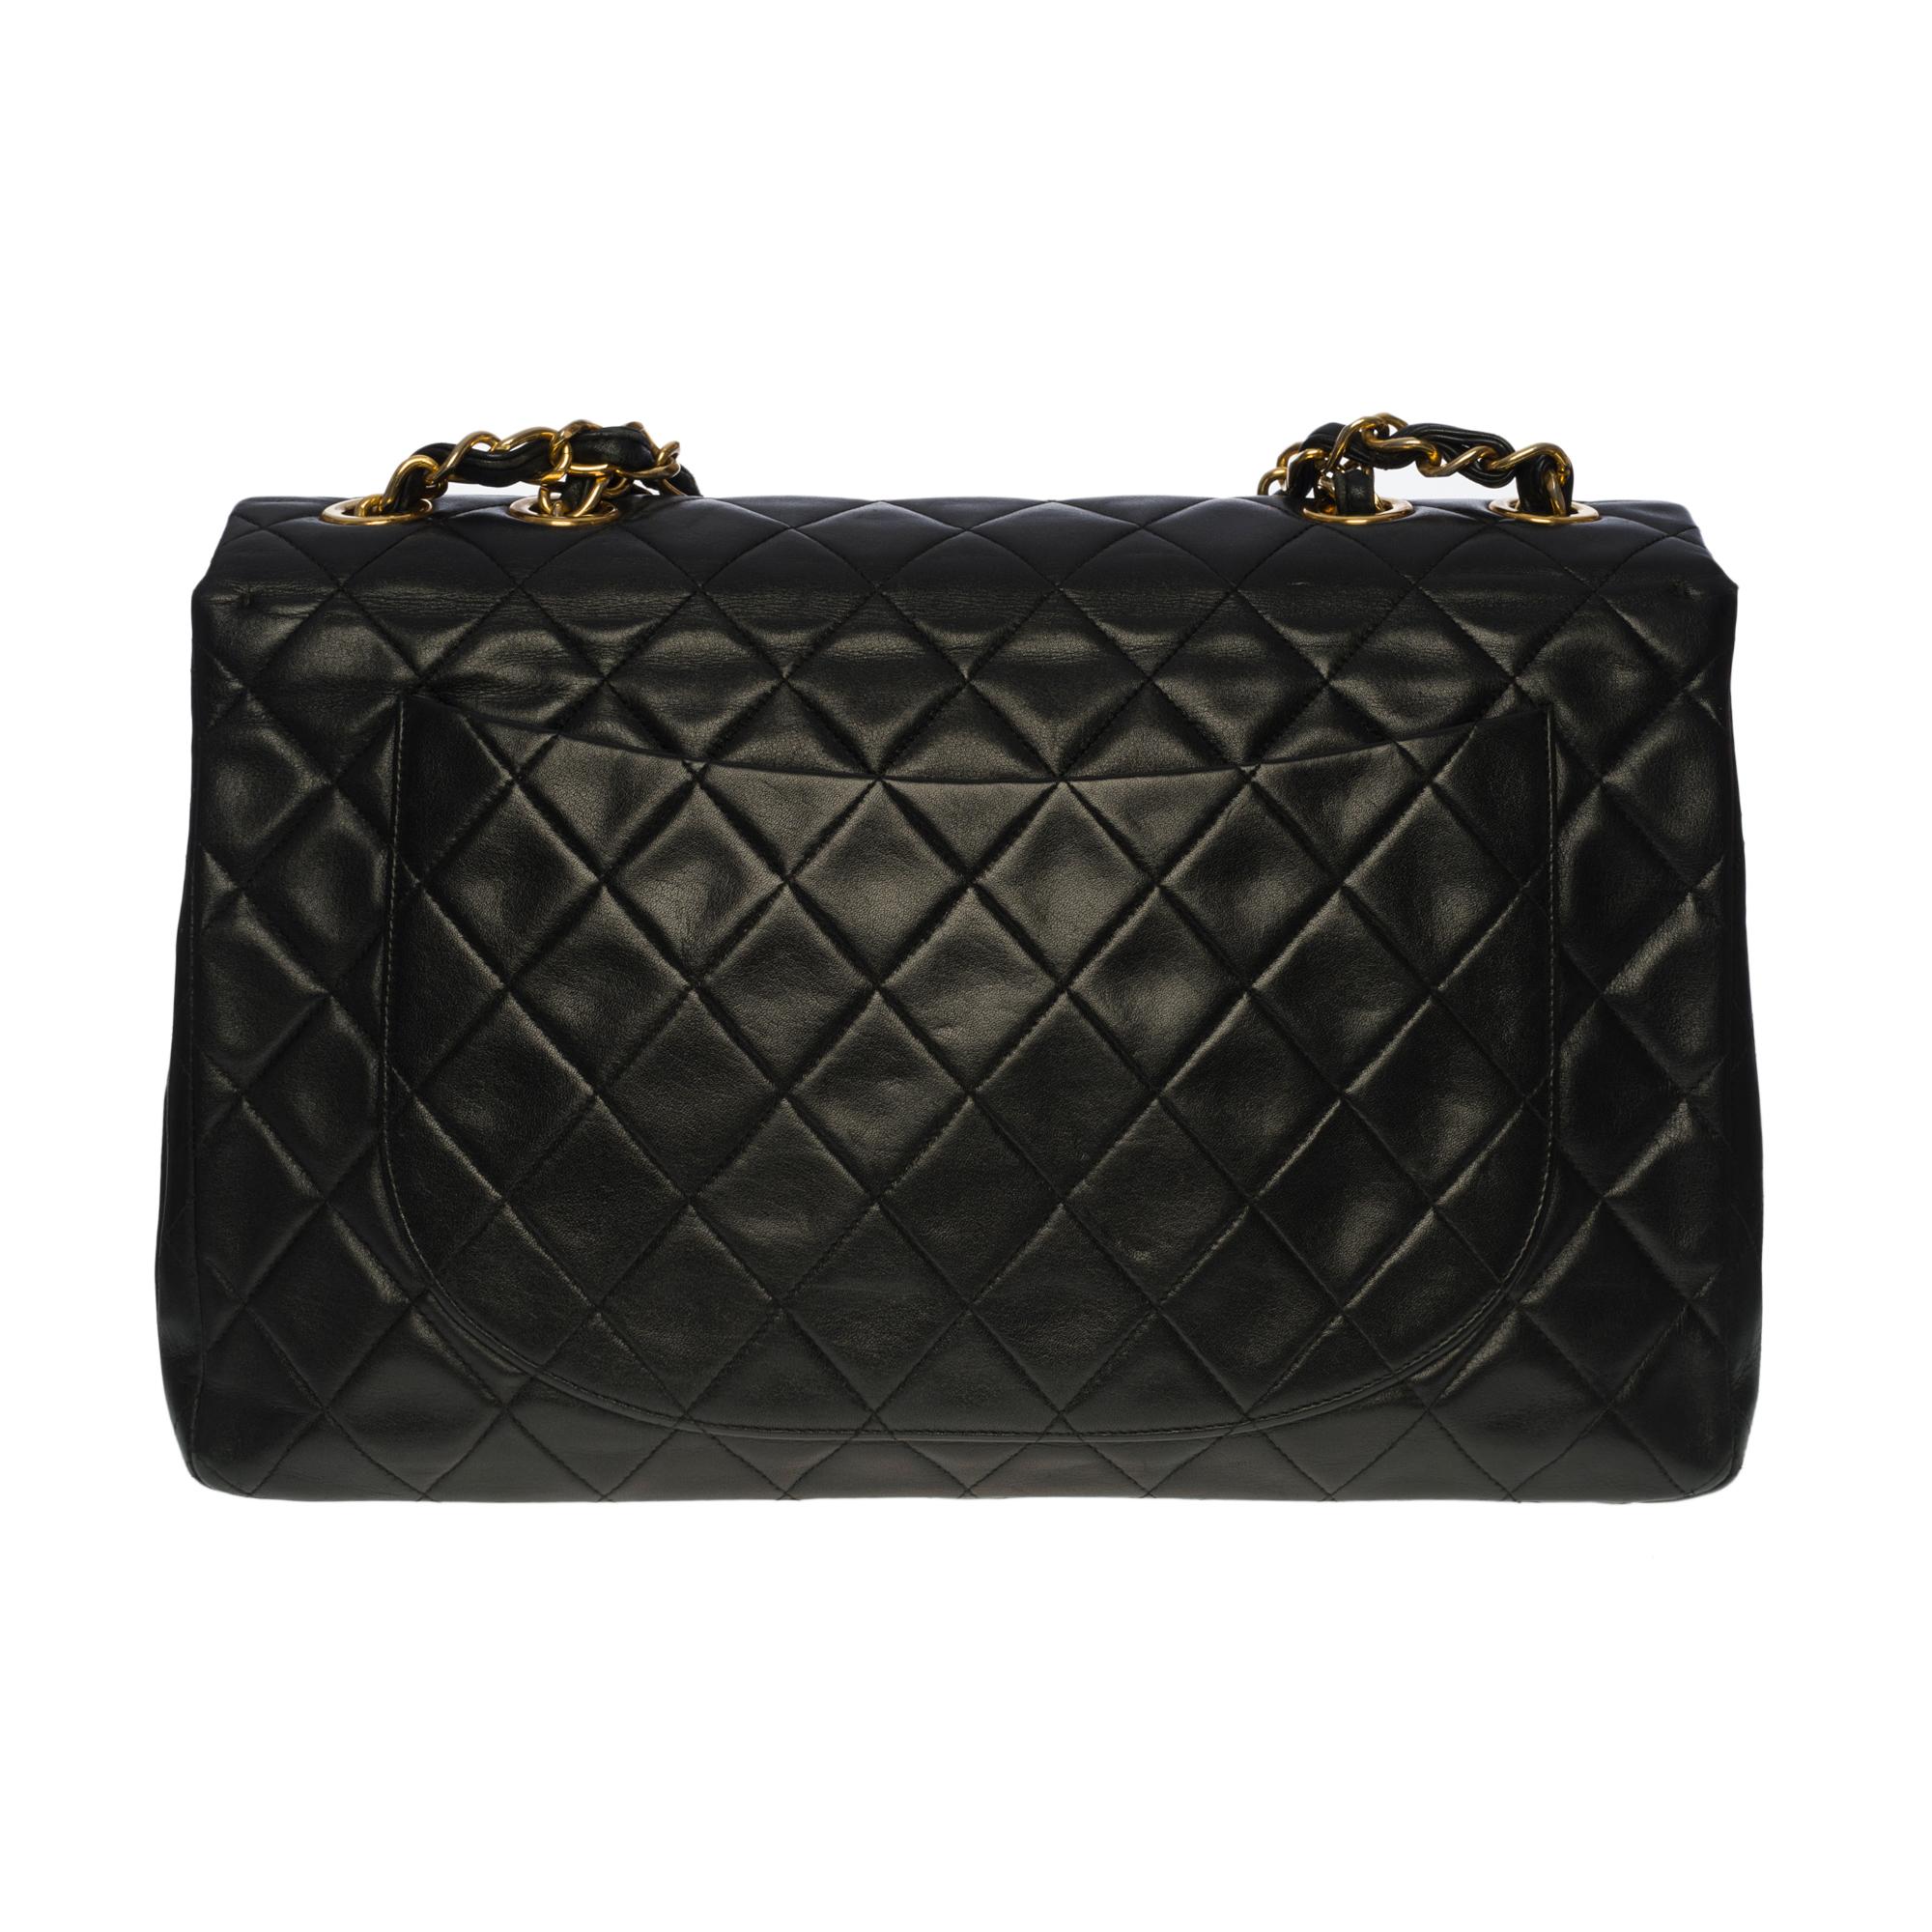 Majestic Chanel Timeless/Classic Maxi Jumbo flap bag in black quilted leather, gold-tone hardware, a gold-tone metal chain handle interlaced with black leather for shoulder and shoulder strap

Backpack pocket
Flap closure with gold CC logo clasp 